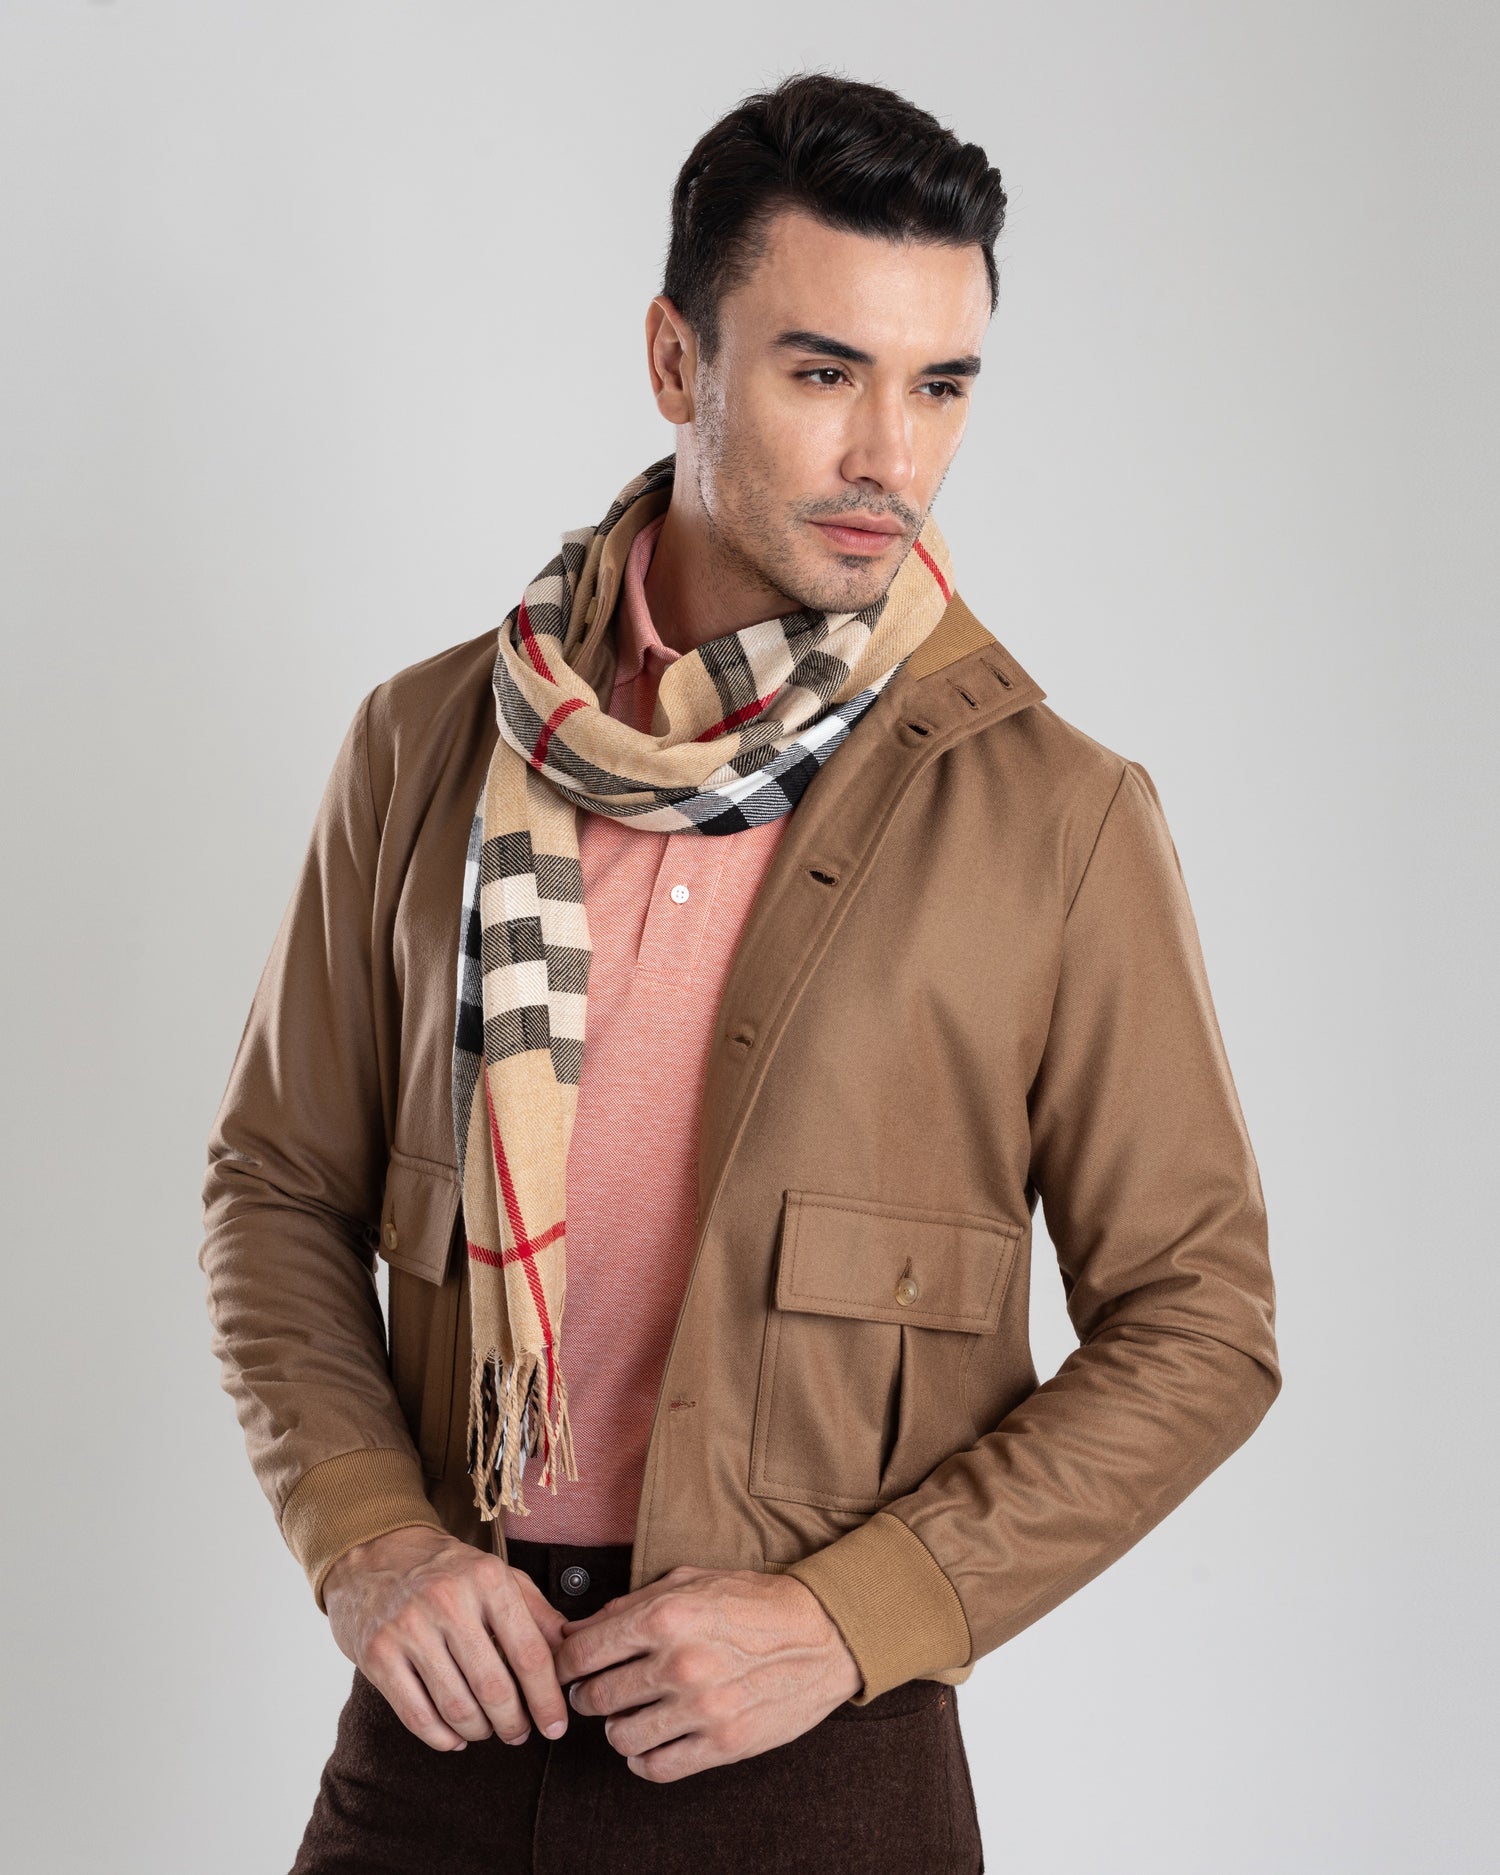 Model wearing the flannel shirt jacket for men by Luxire in sand with rib collar wearing a scarf